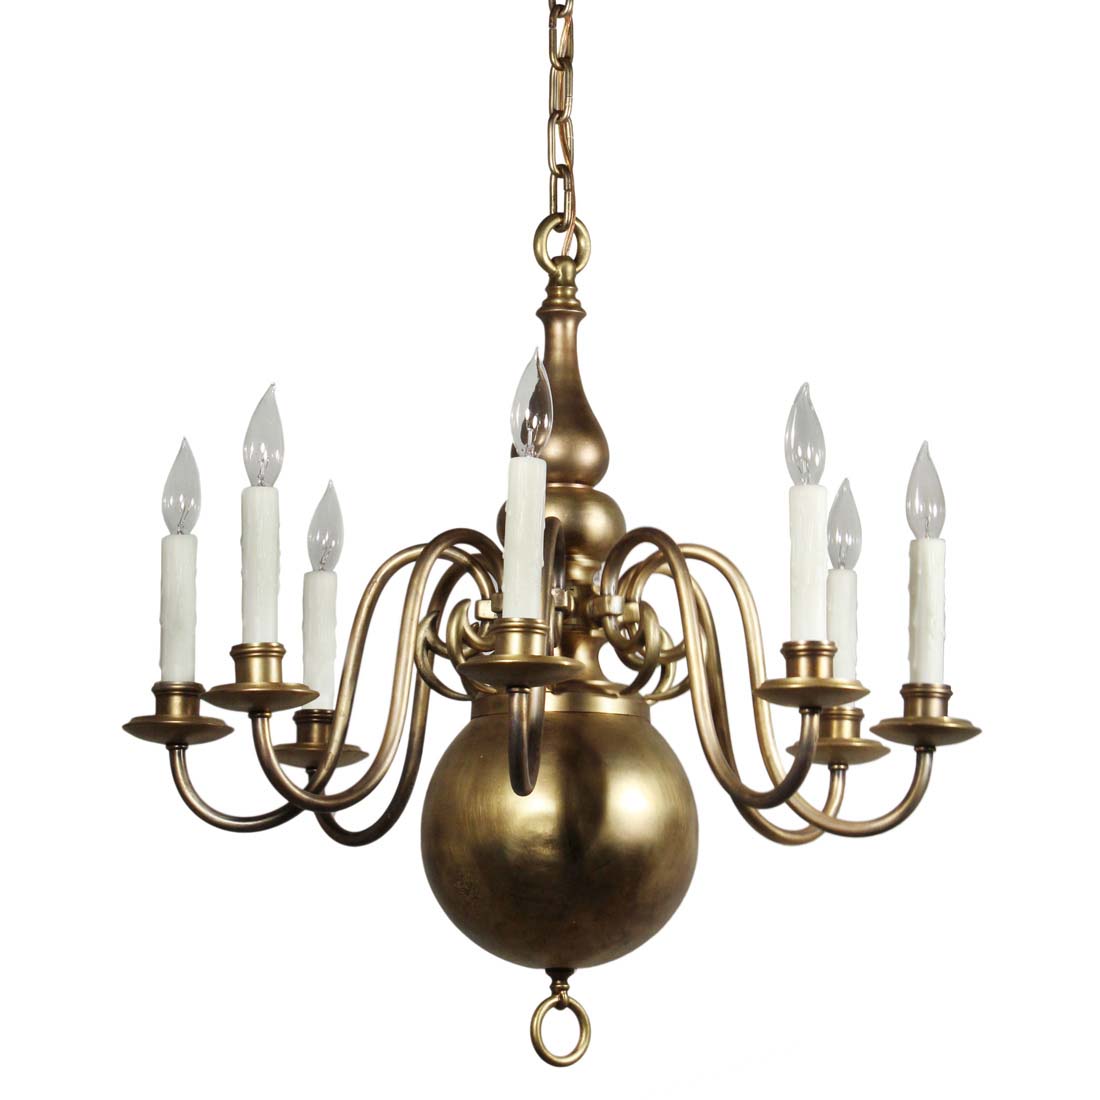 SOLD Antique Colonial Revival Brass Chandelier, Early 1900's